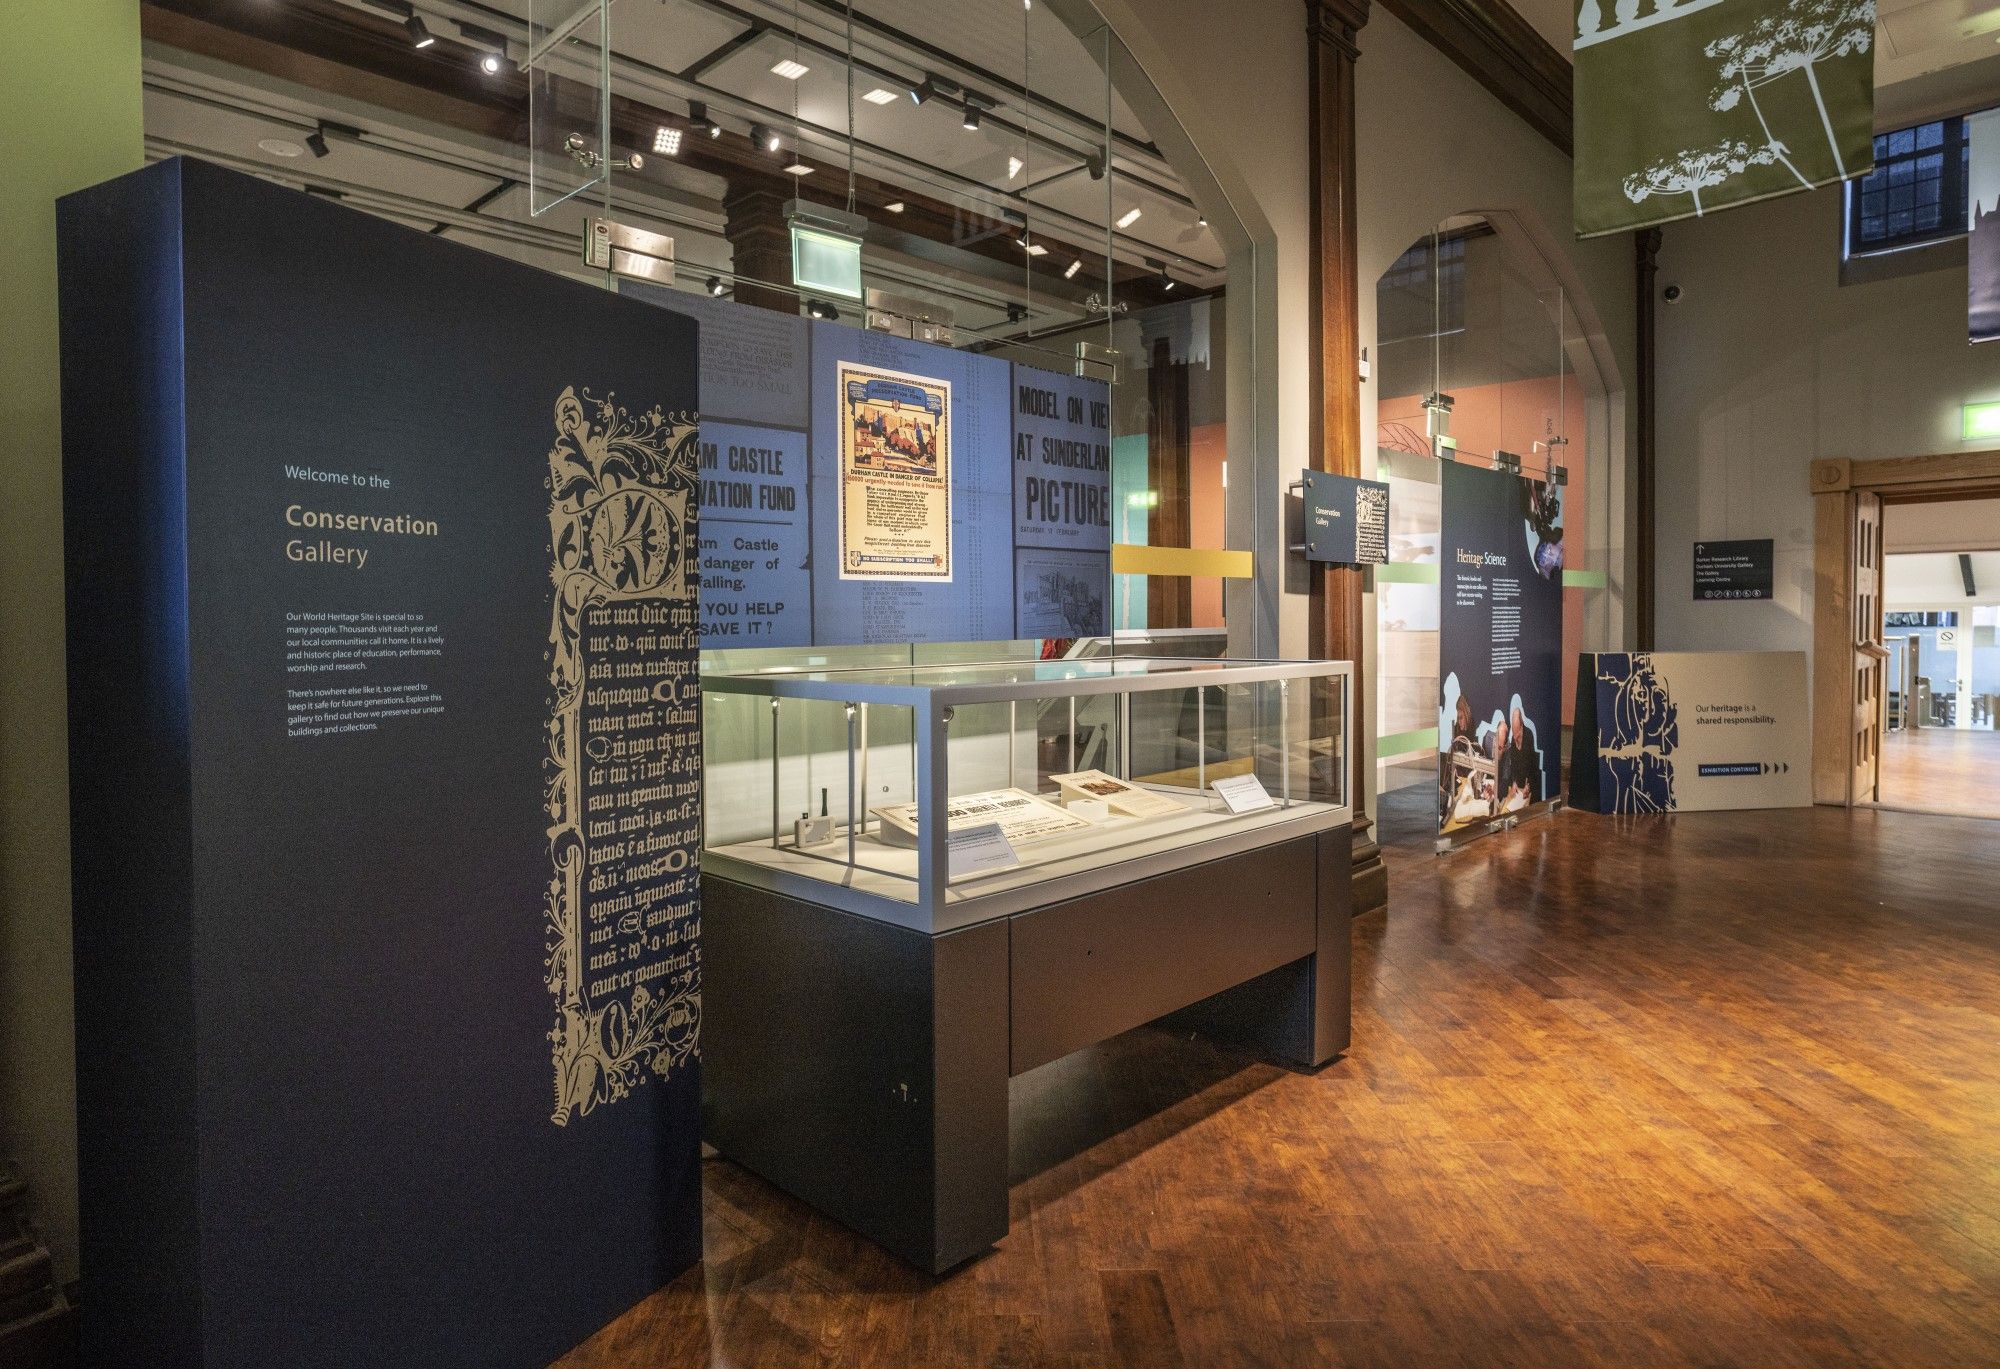 The Conservation Gallery at the World Heritage Site Visitor Centre